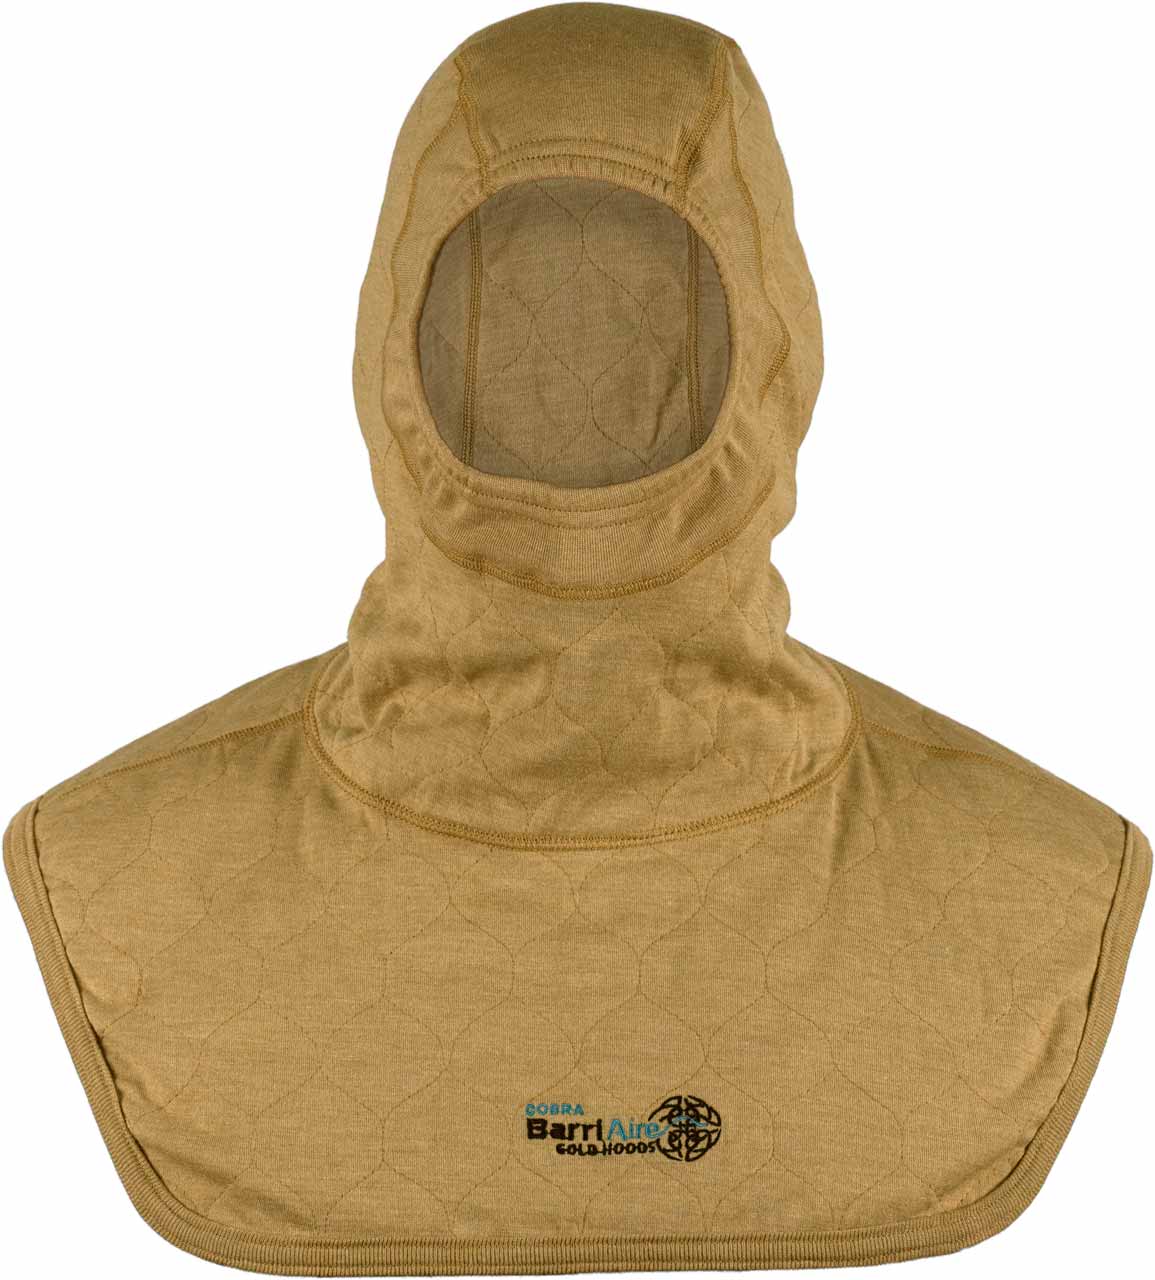 PGI BarriAire Gold Particulate Hood - Complete Coverage with Extended Bib and Rib Knit Face Opening 39704-00-194071 - Front